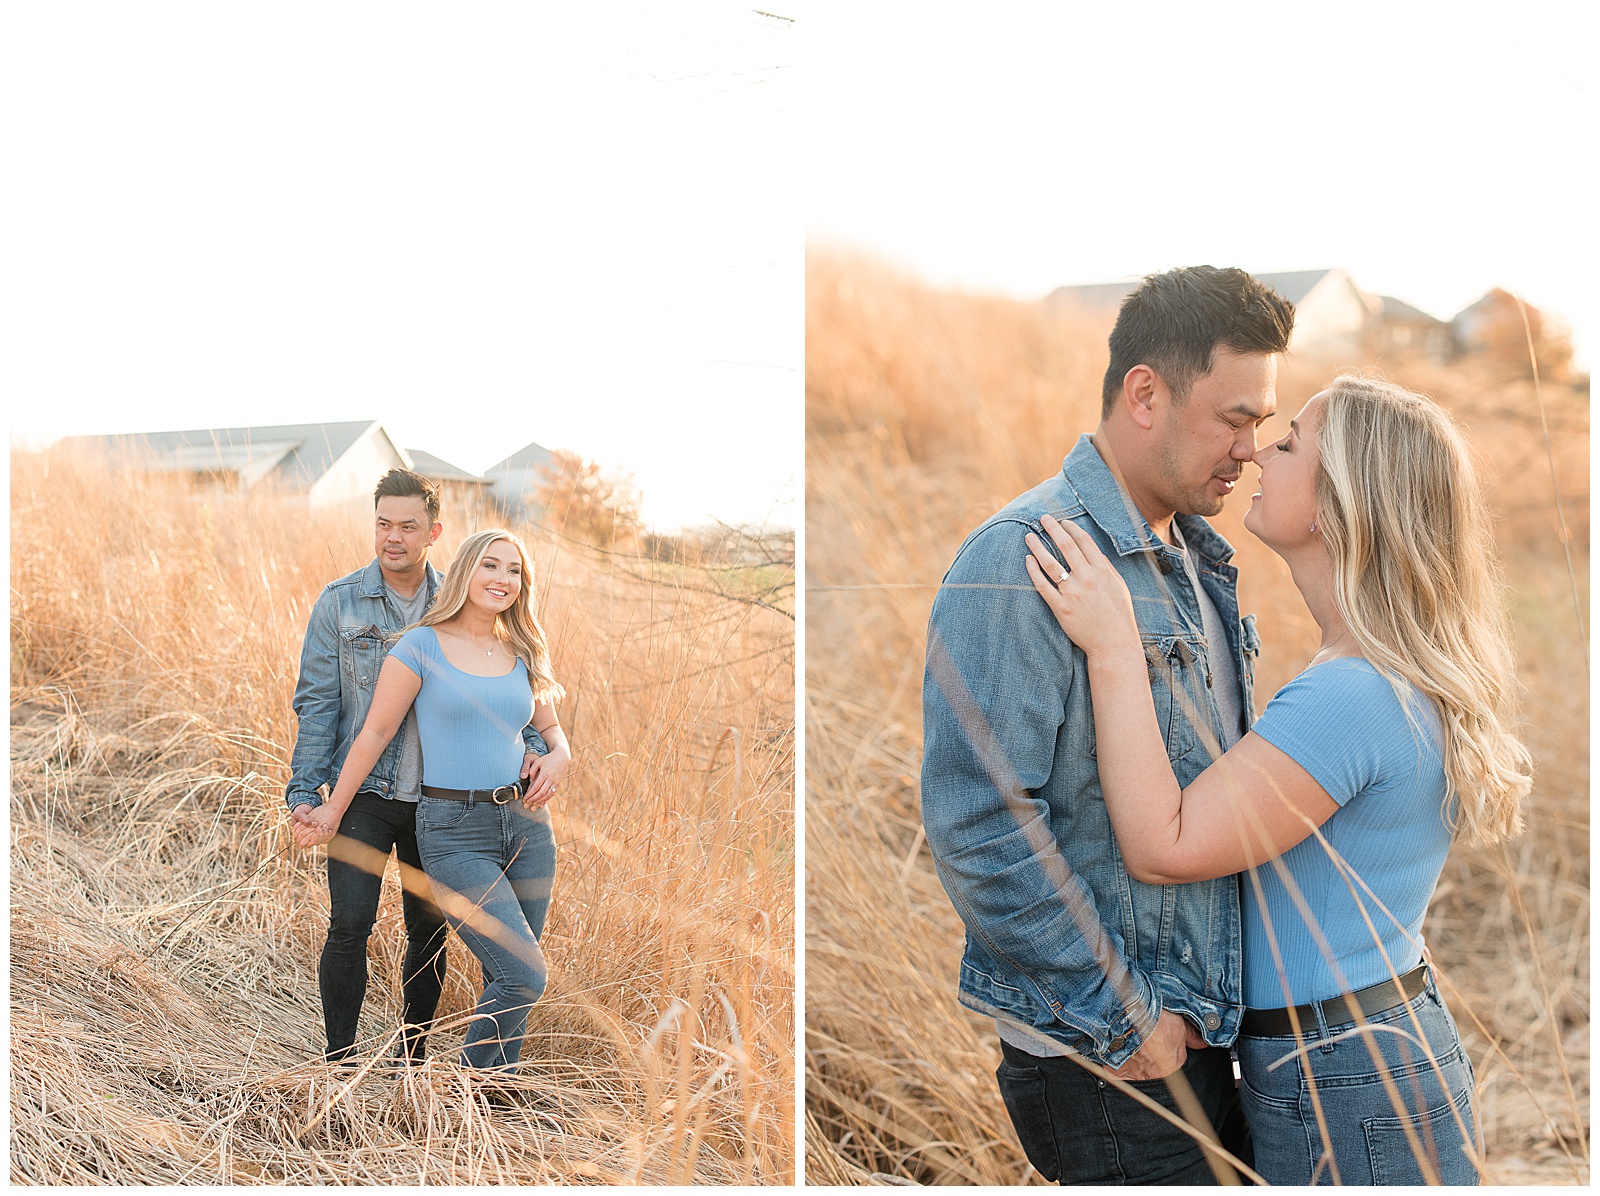 couple standing close in tall dried grasses wearing shades of blue and jeans